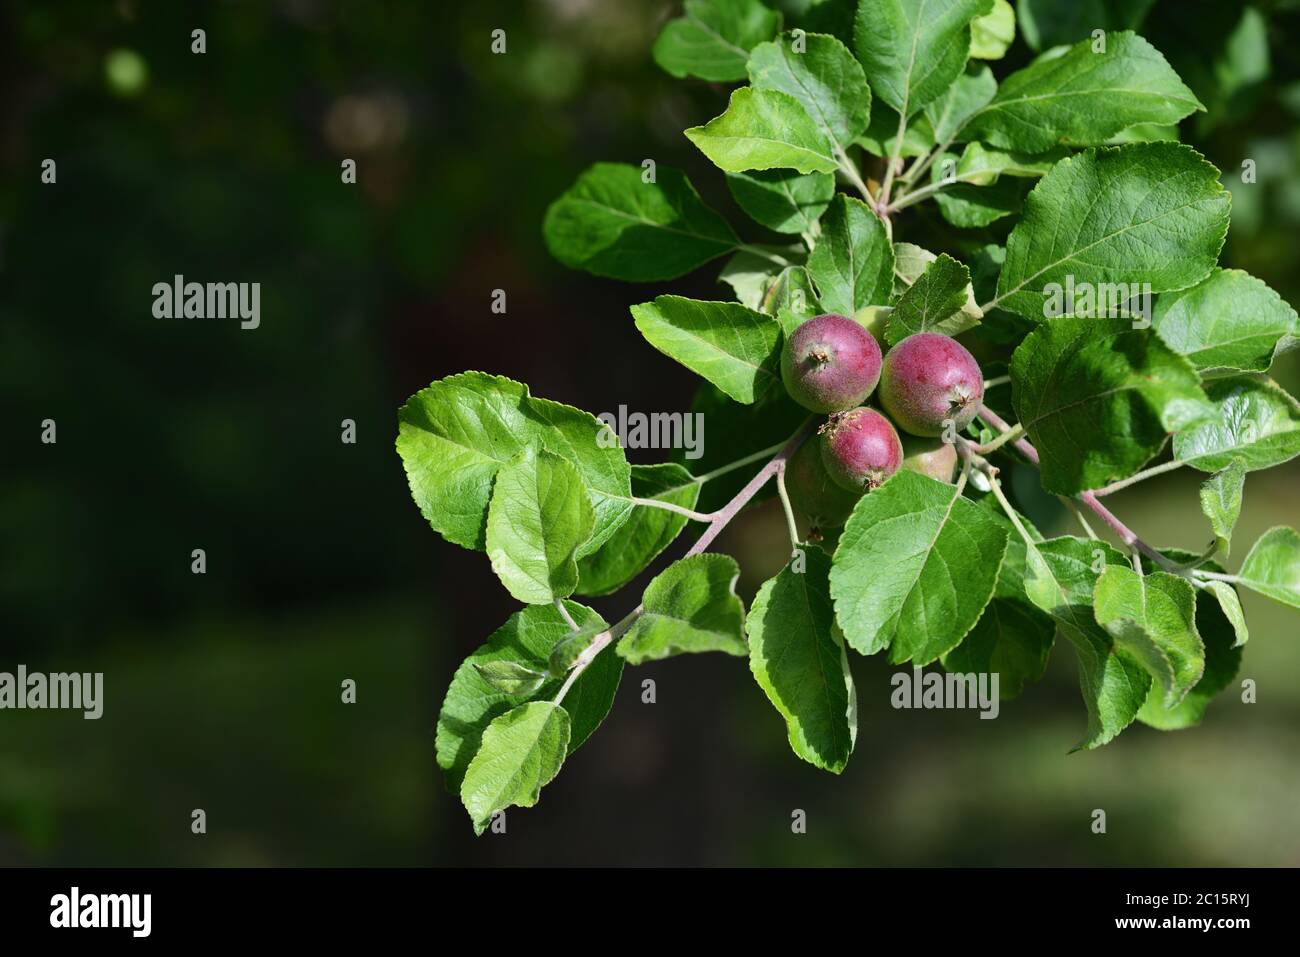 Small red unripe apples on the branch of an apple tree in early summer Stock Photo